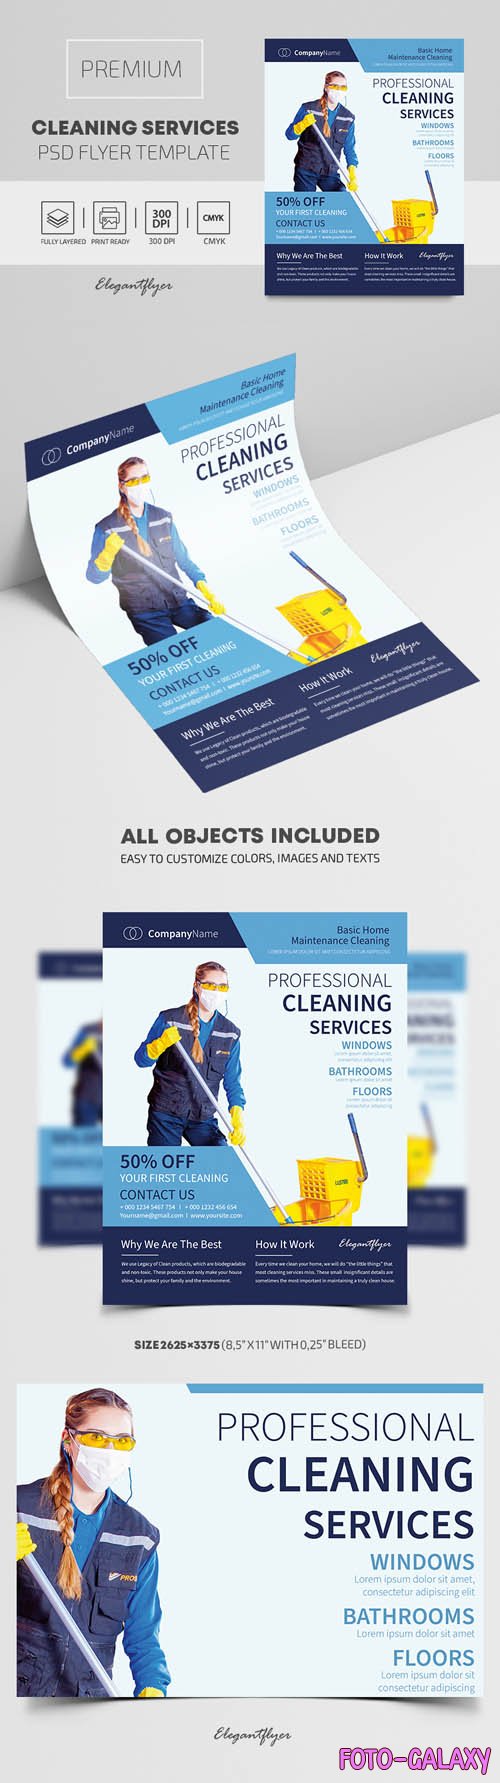 Cleaning Services Premium PSD Flyer Template